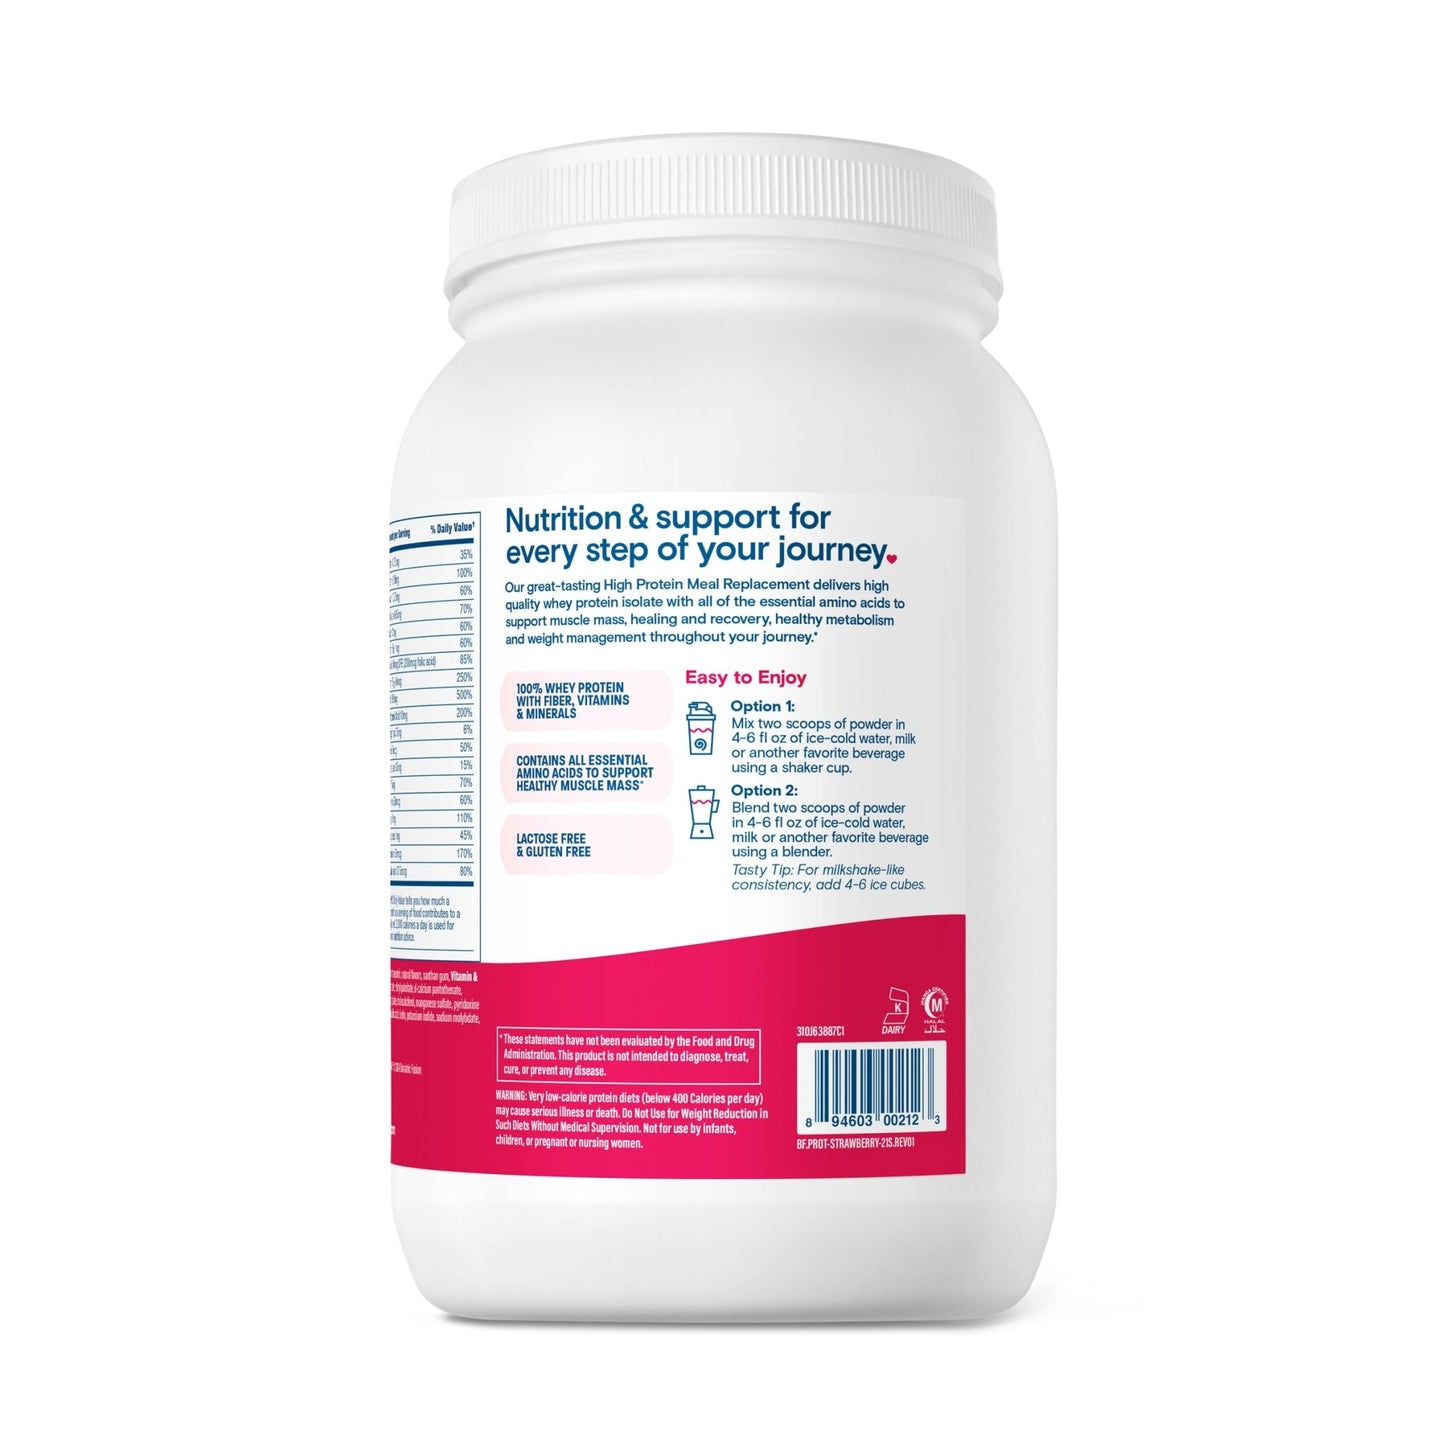 Bariatric Fusion Strawberry High Protein Meal Replacement directions.